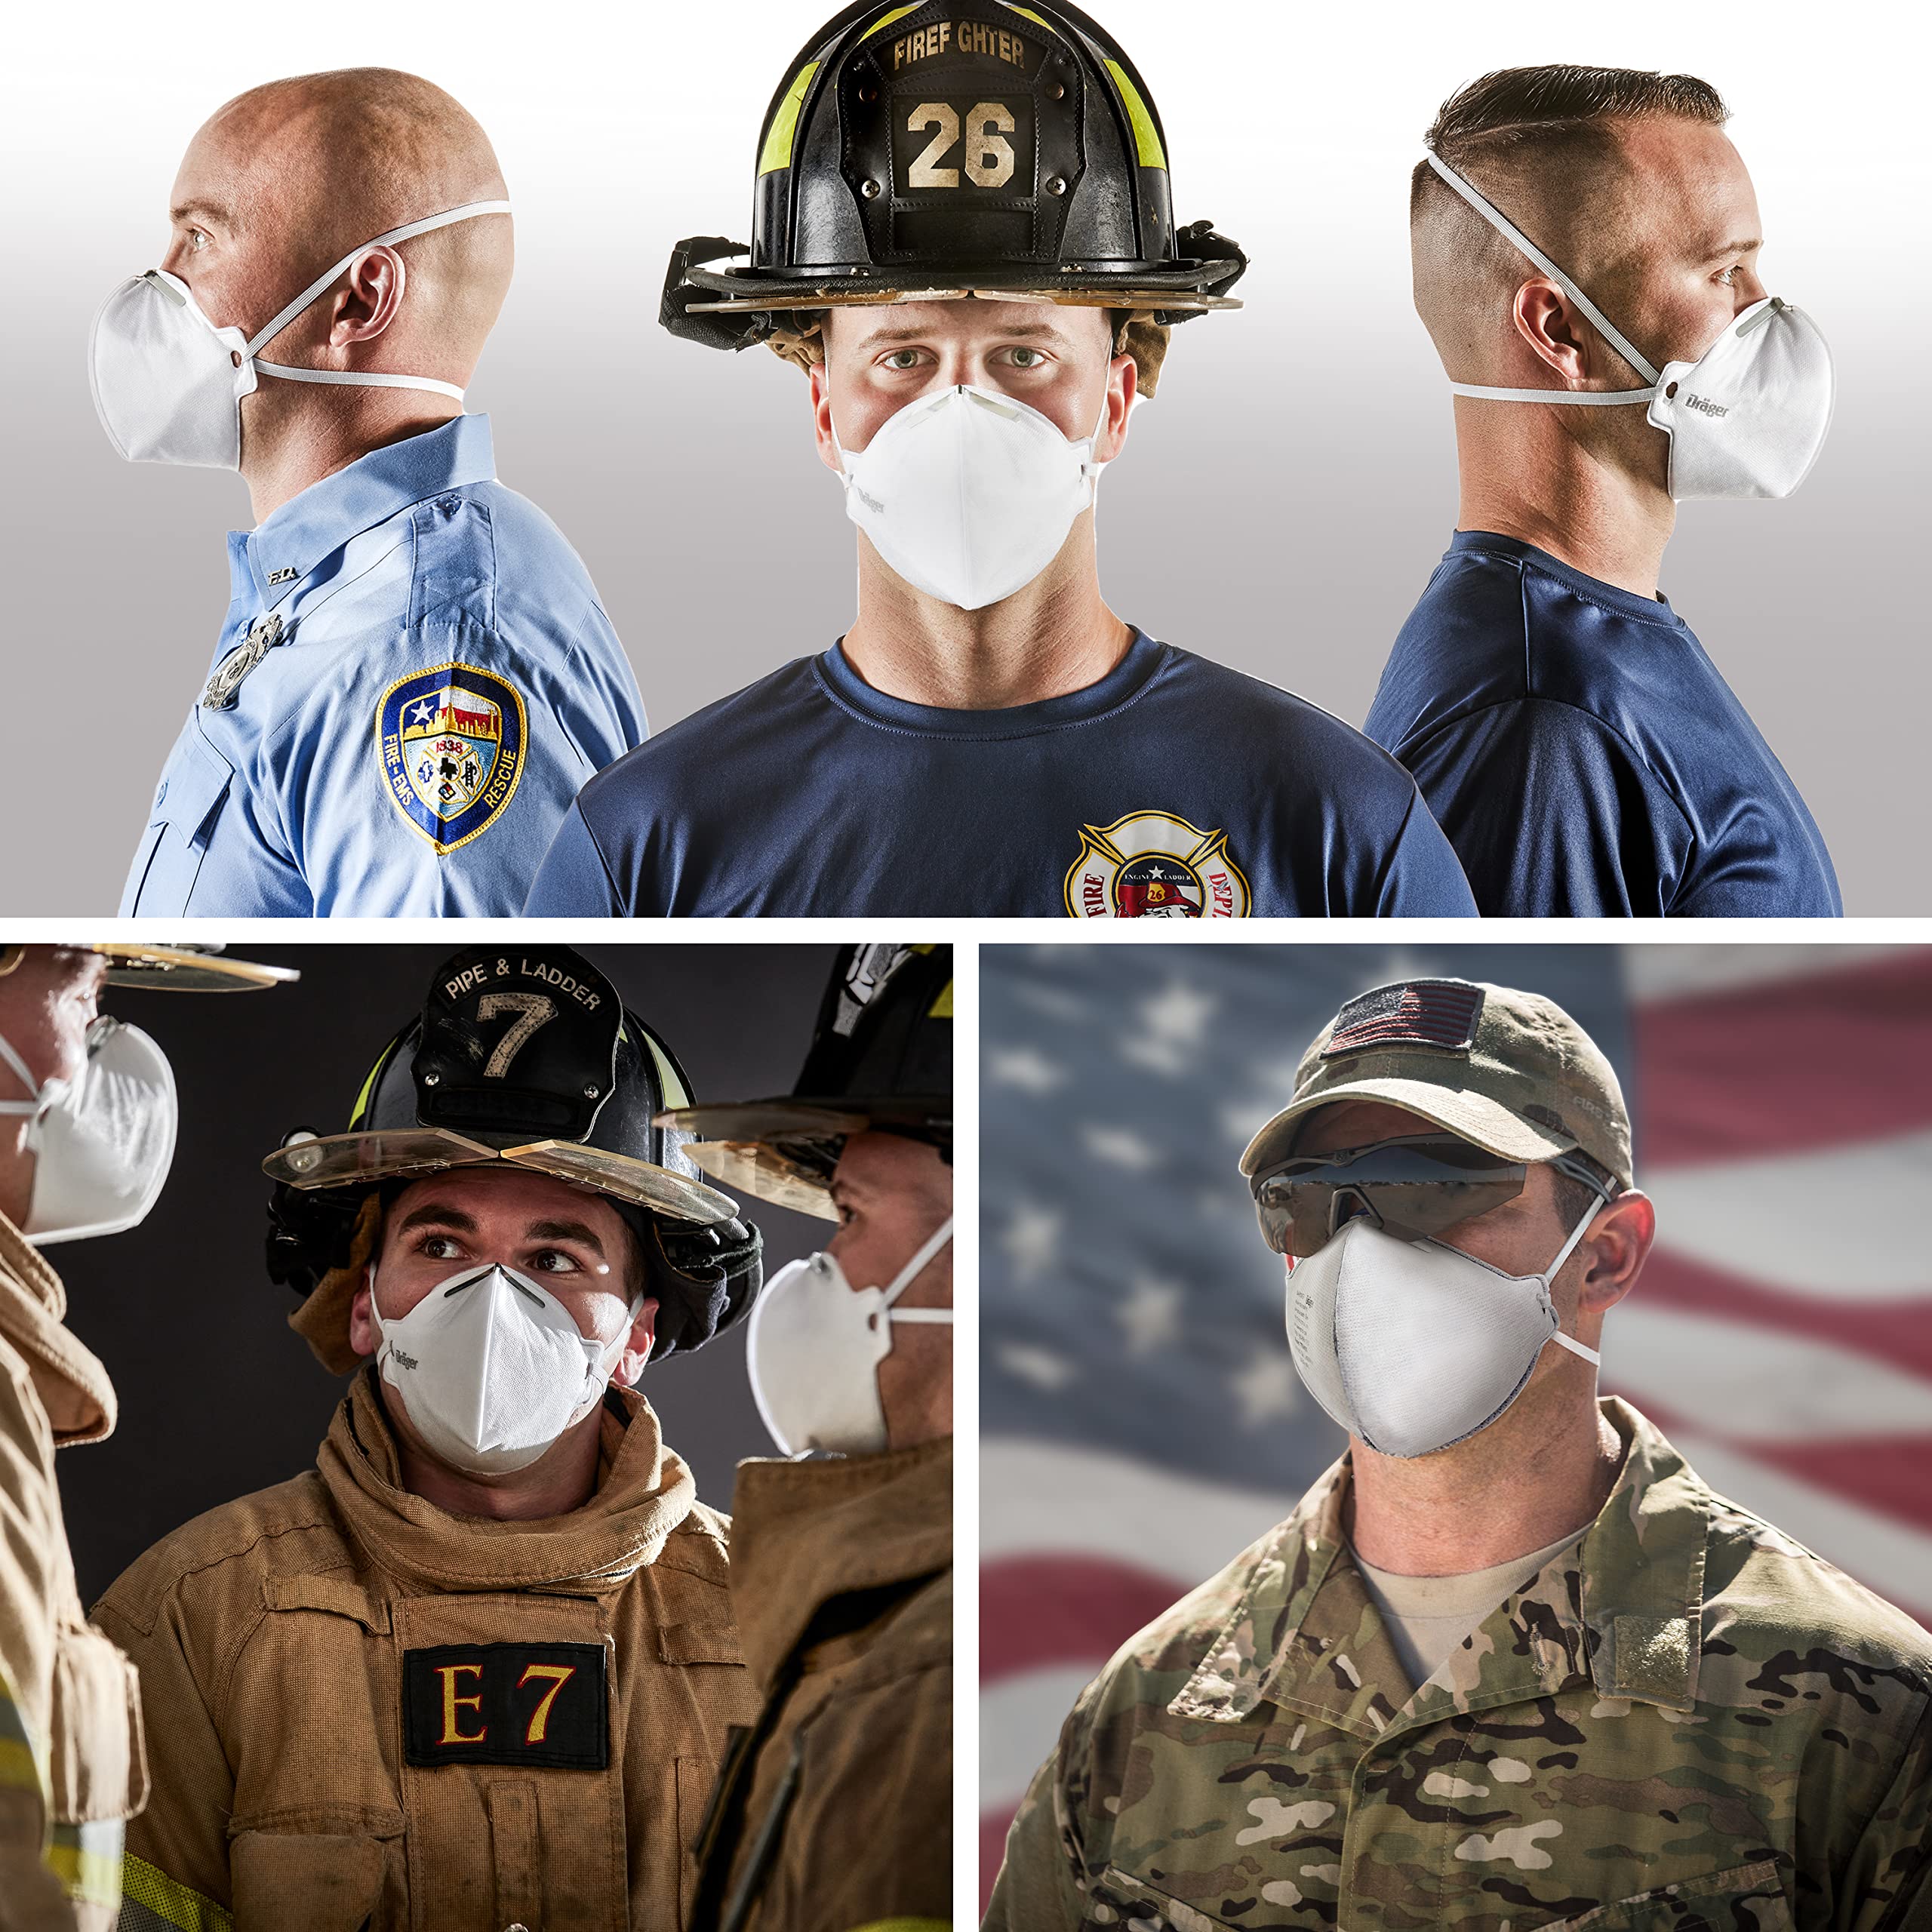 Dräger X-plore 1750 C N95 respirator mask made in the US | 20 NIOSH-approved respirators, universal fit